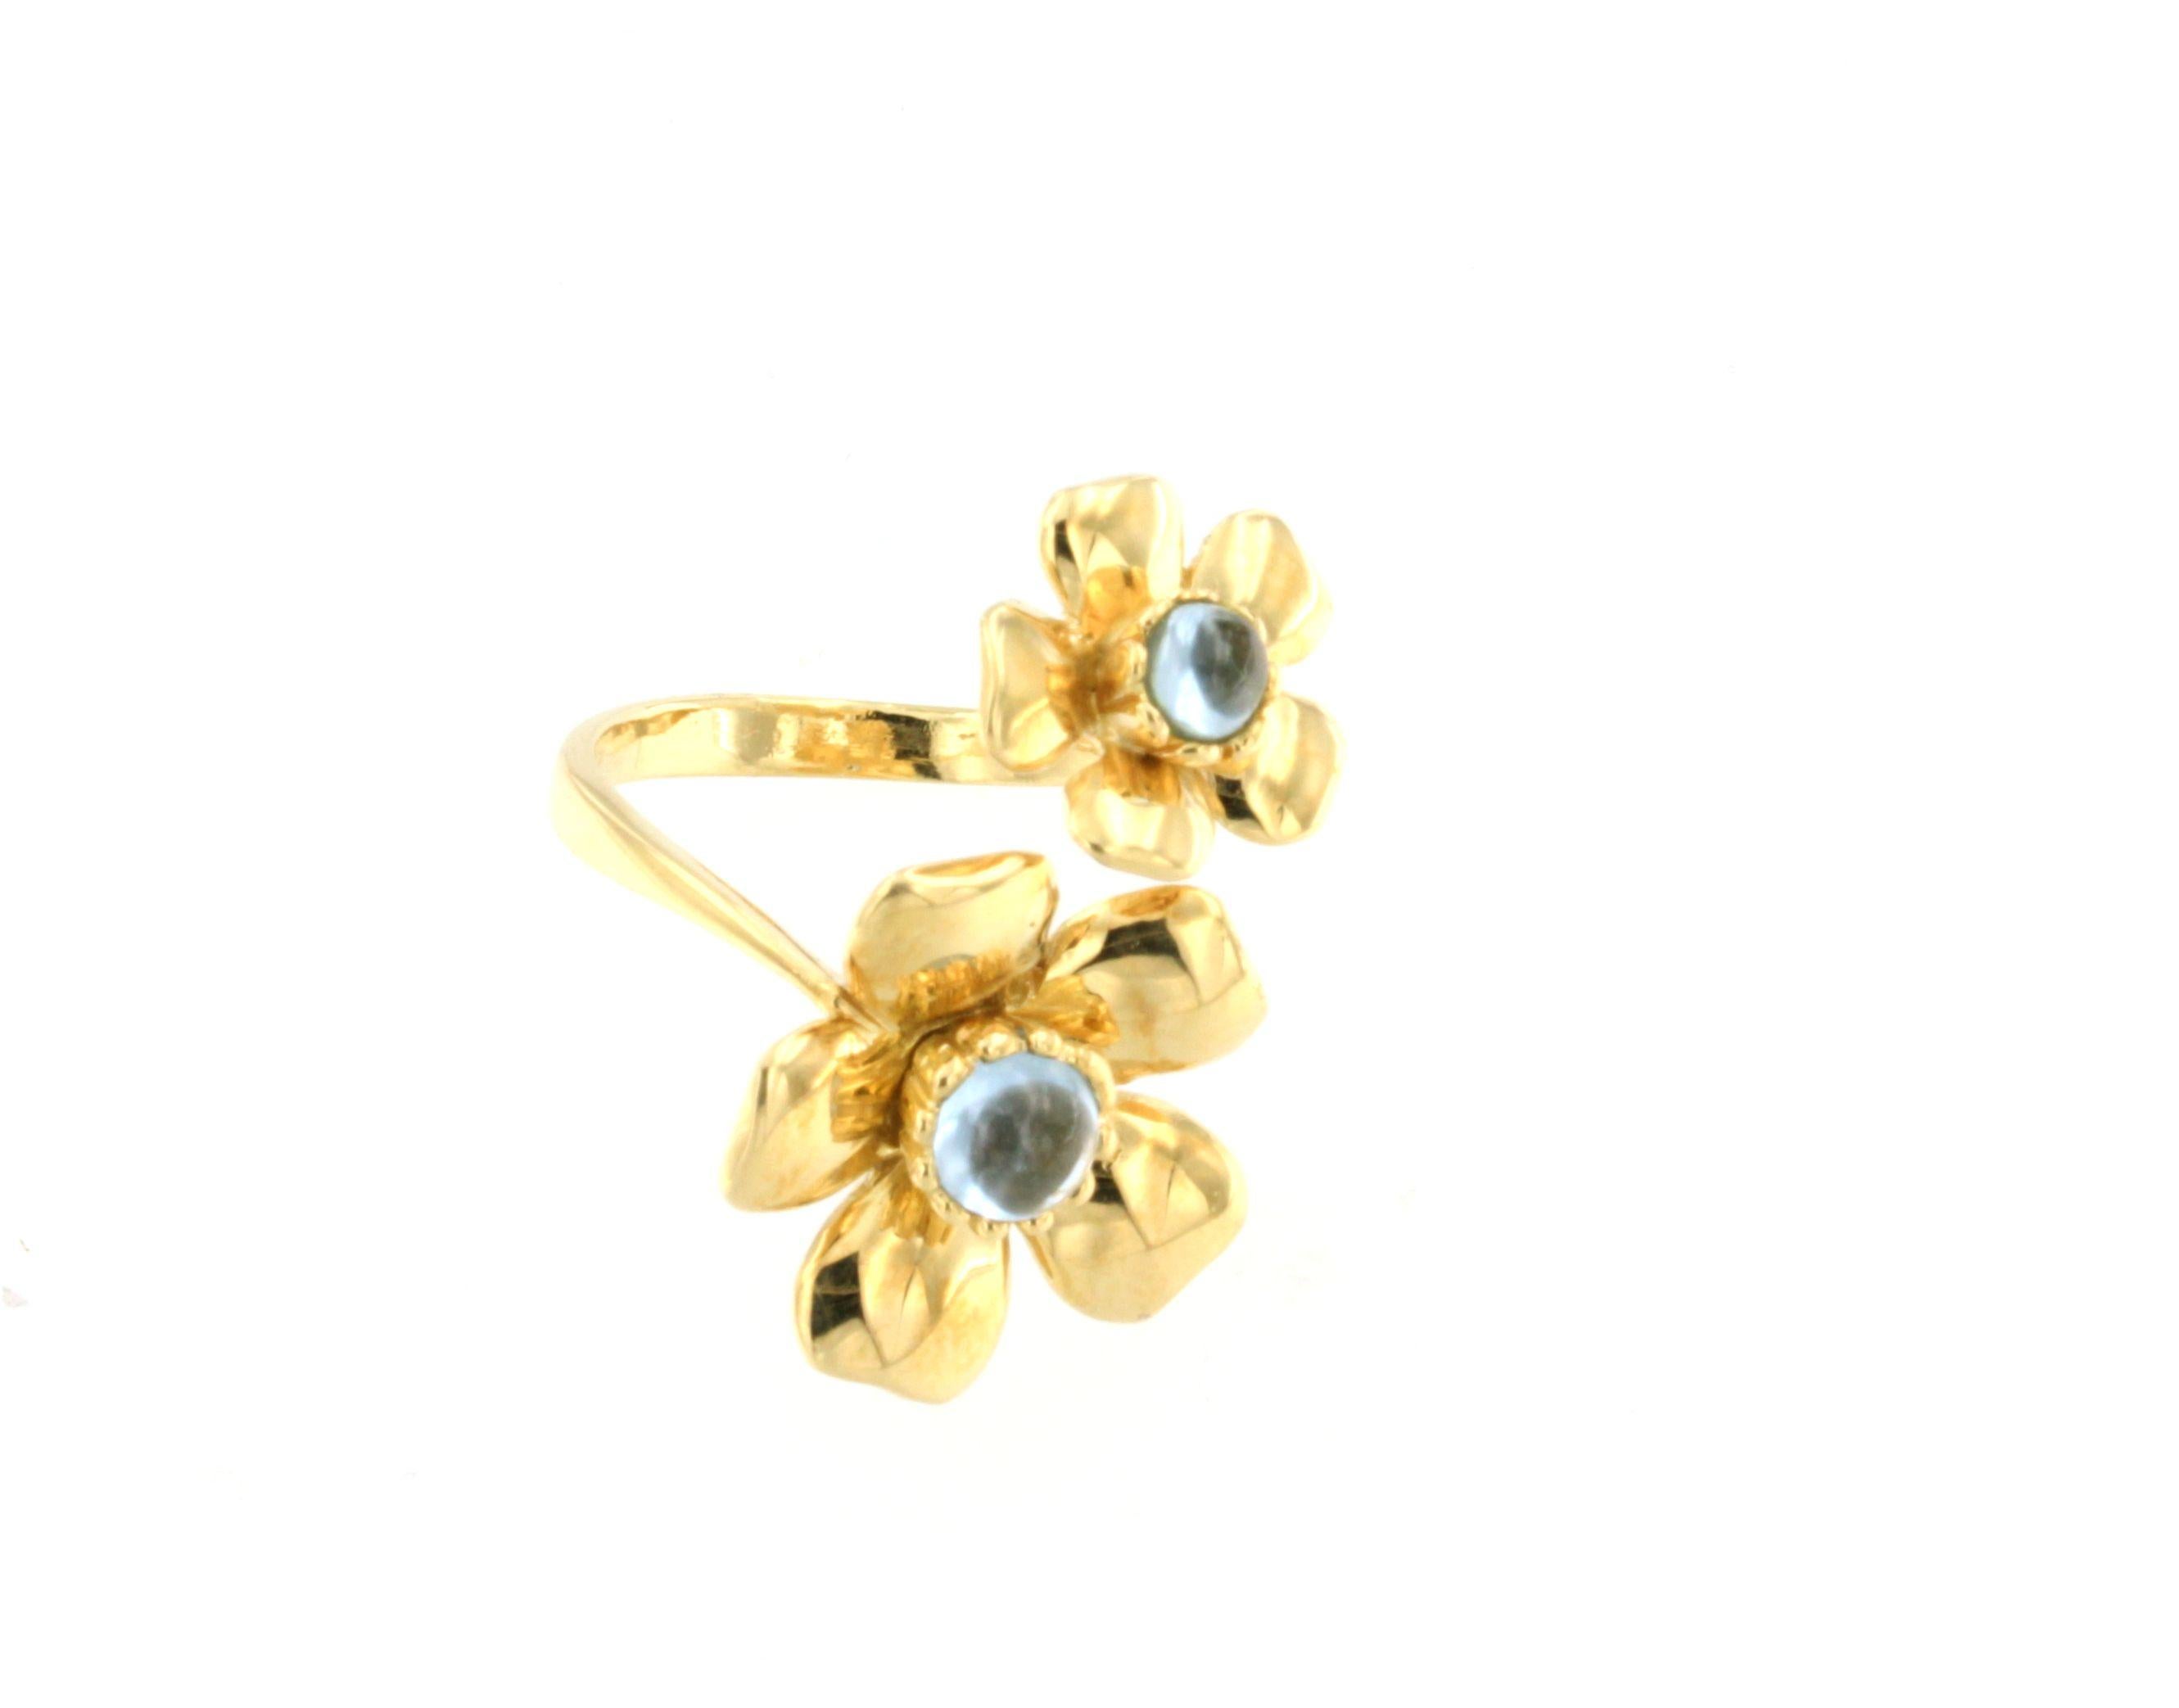 Inspired by nature, flowers are synonymous with happiness hand made in Italy  by Stanoppi Jewellery since 1948.

Size of ring: 14 - 54 - 7,5   g.7.30

All Stanoppi Jewelry is new and has never been previously owned or worn. Each item will arrive at